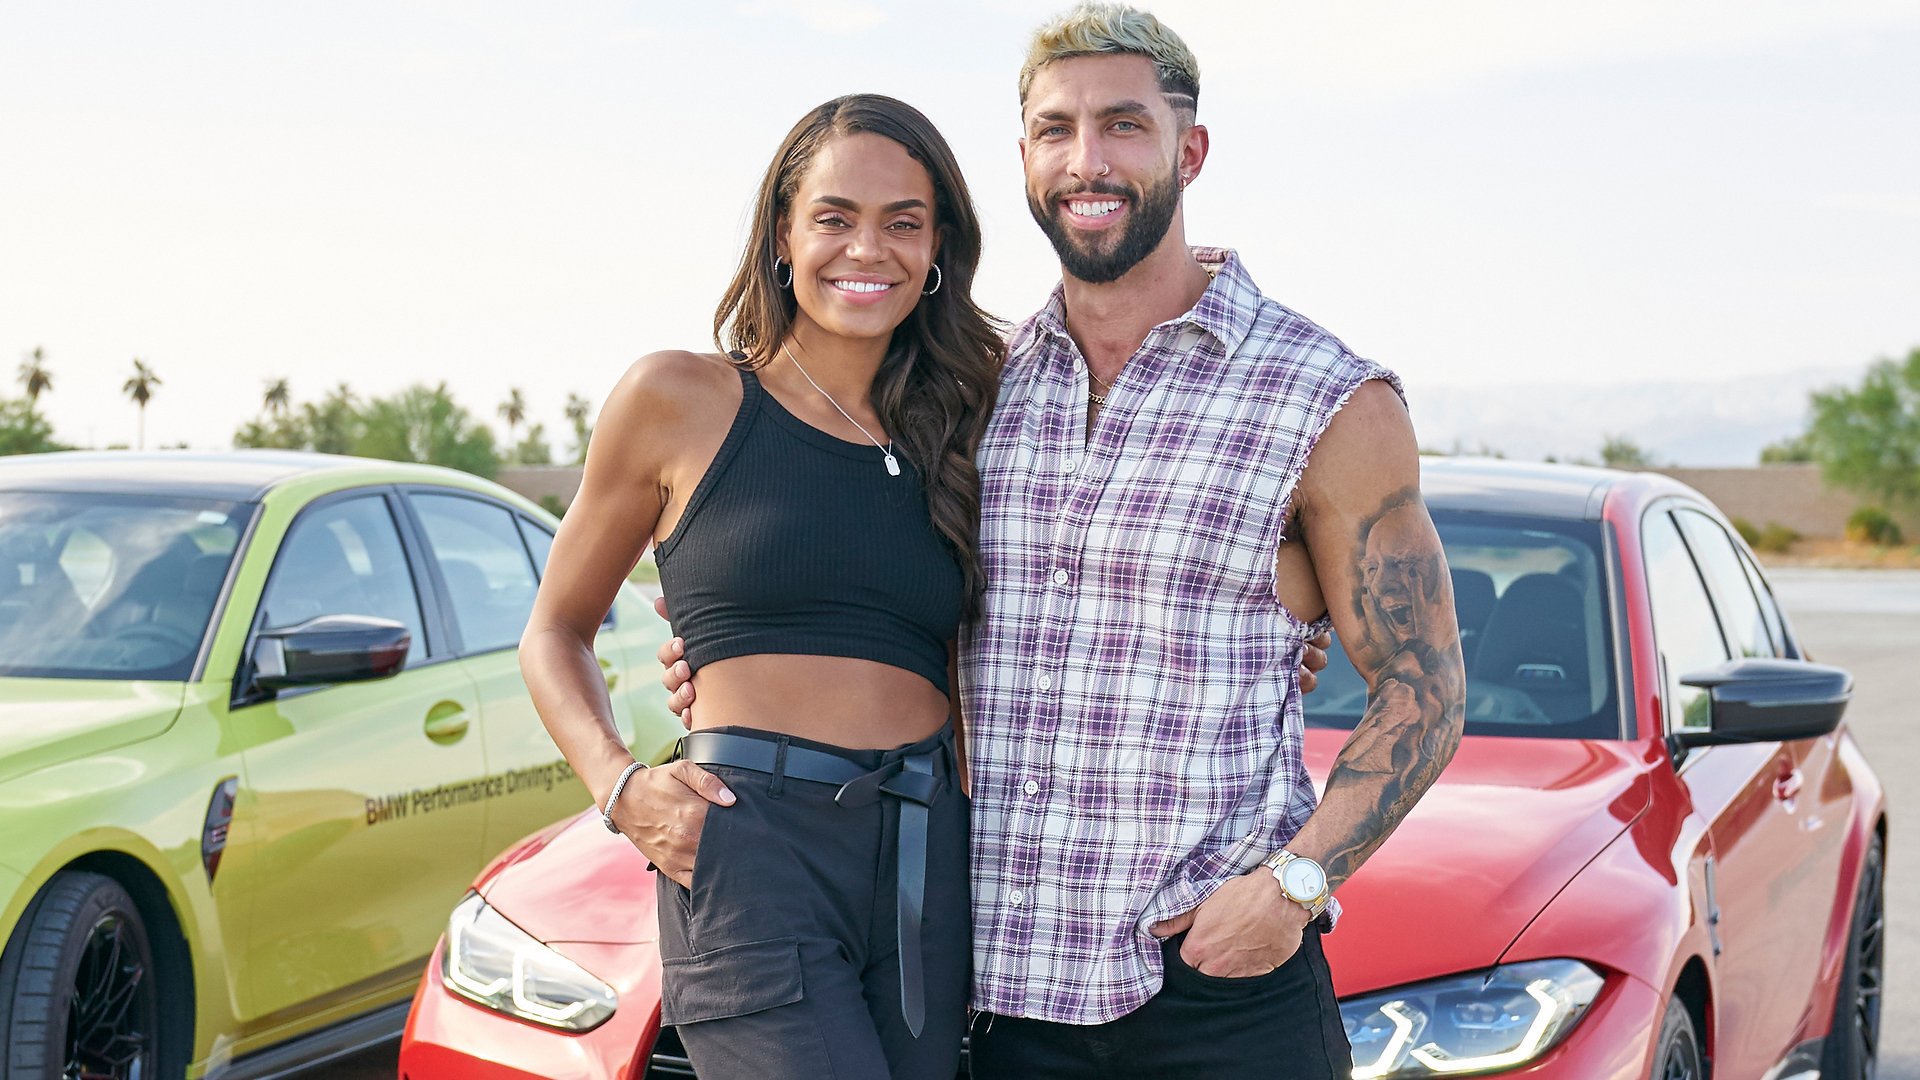 Michelle Young and Martin Gelbspan on their one-on-one date together in ‘The Bachelorette’ Season 18 Episode 4